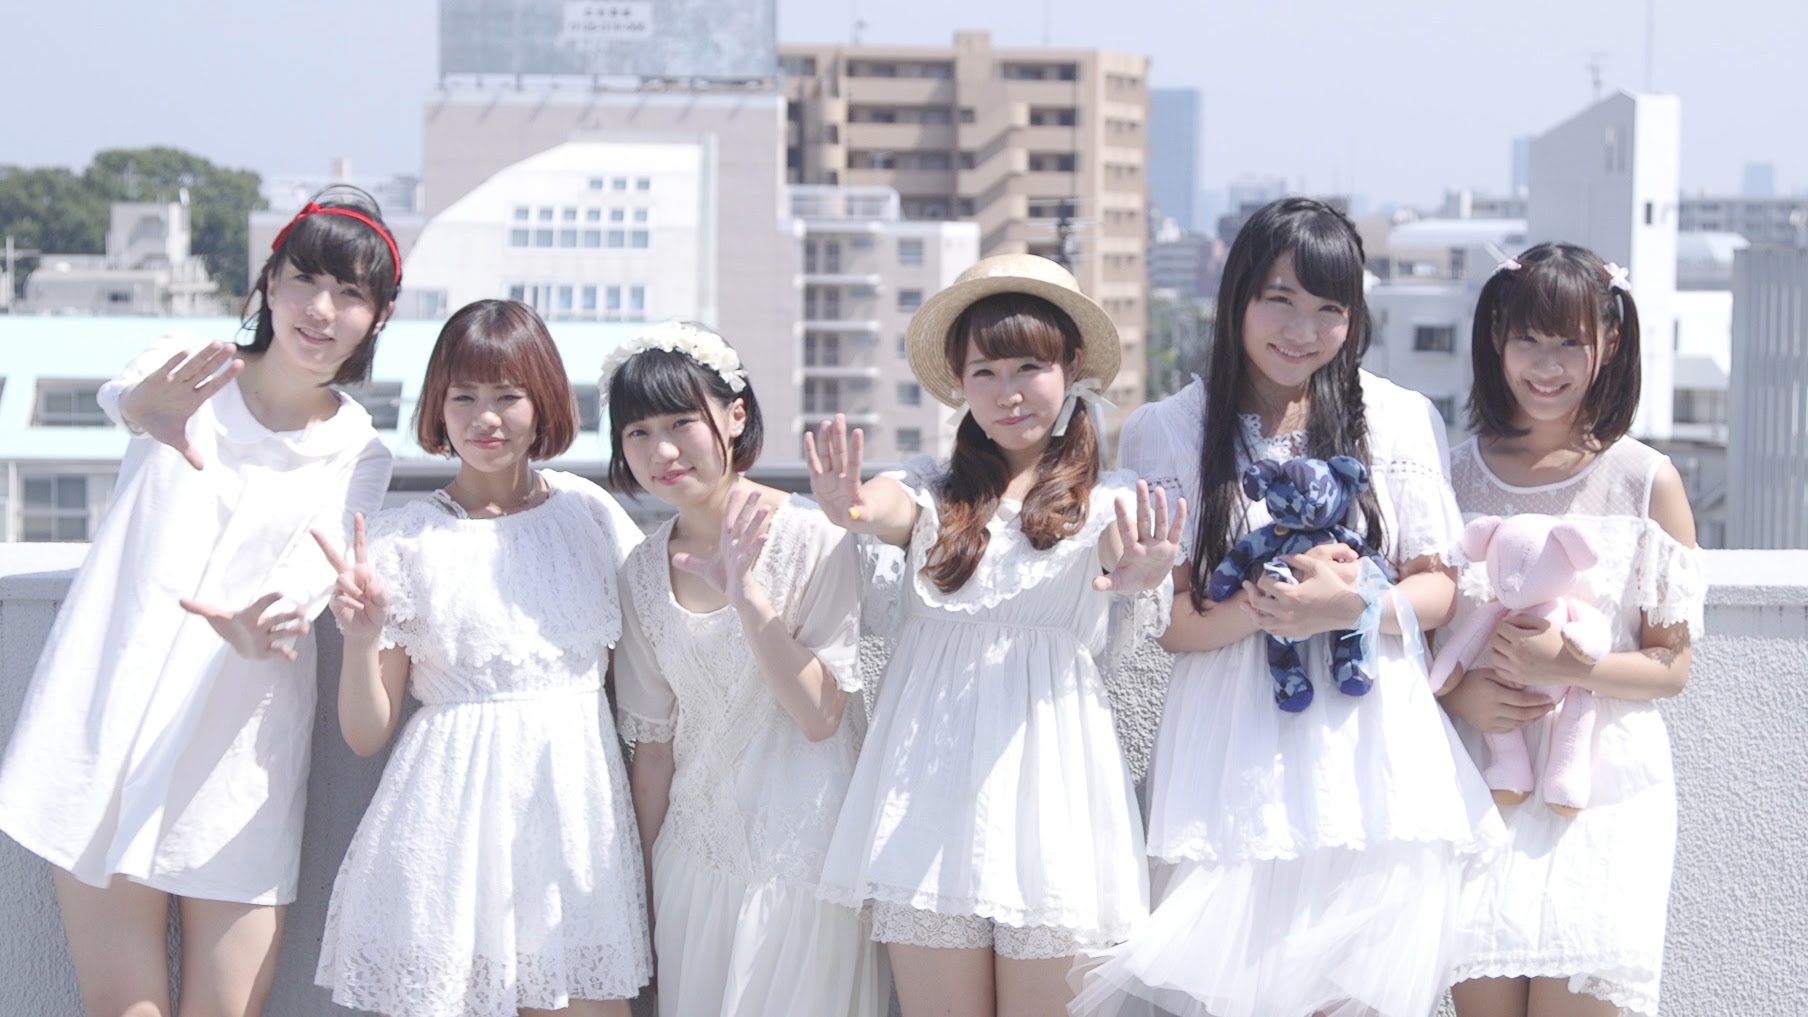 Summer Rocket Lead People to Endless Summer in the MV “Natsu no Triangle”!